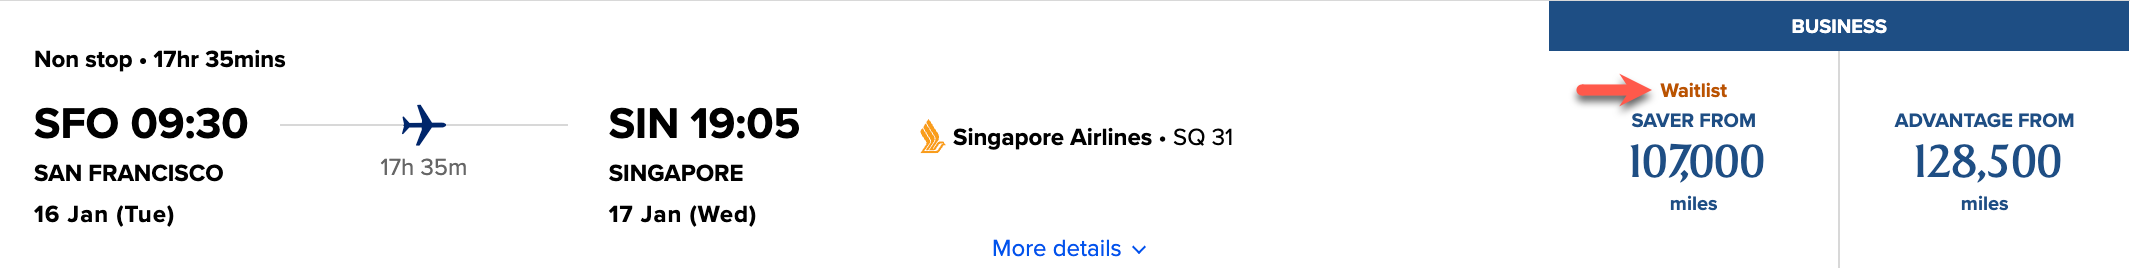 Singapore Airlines waitlisted award